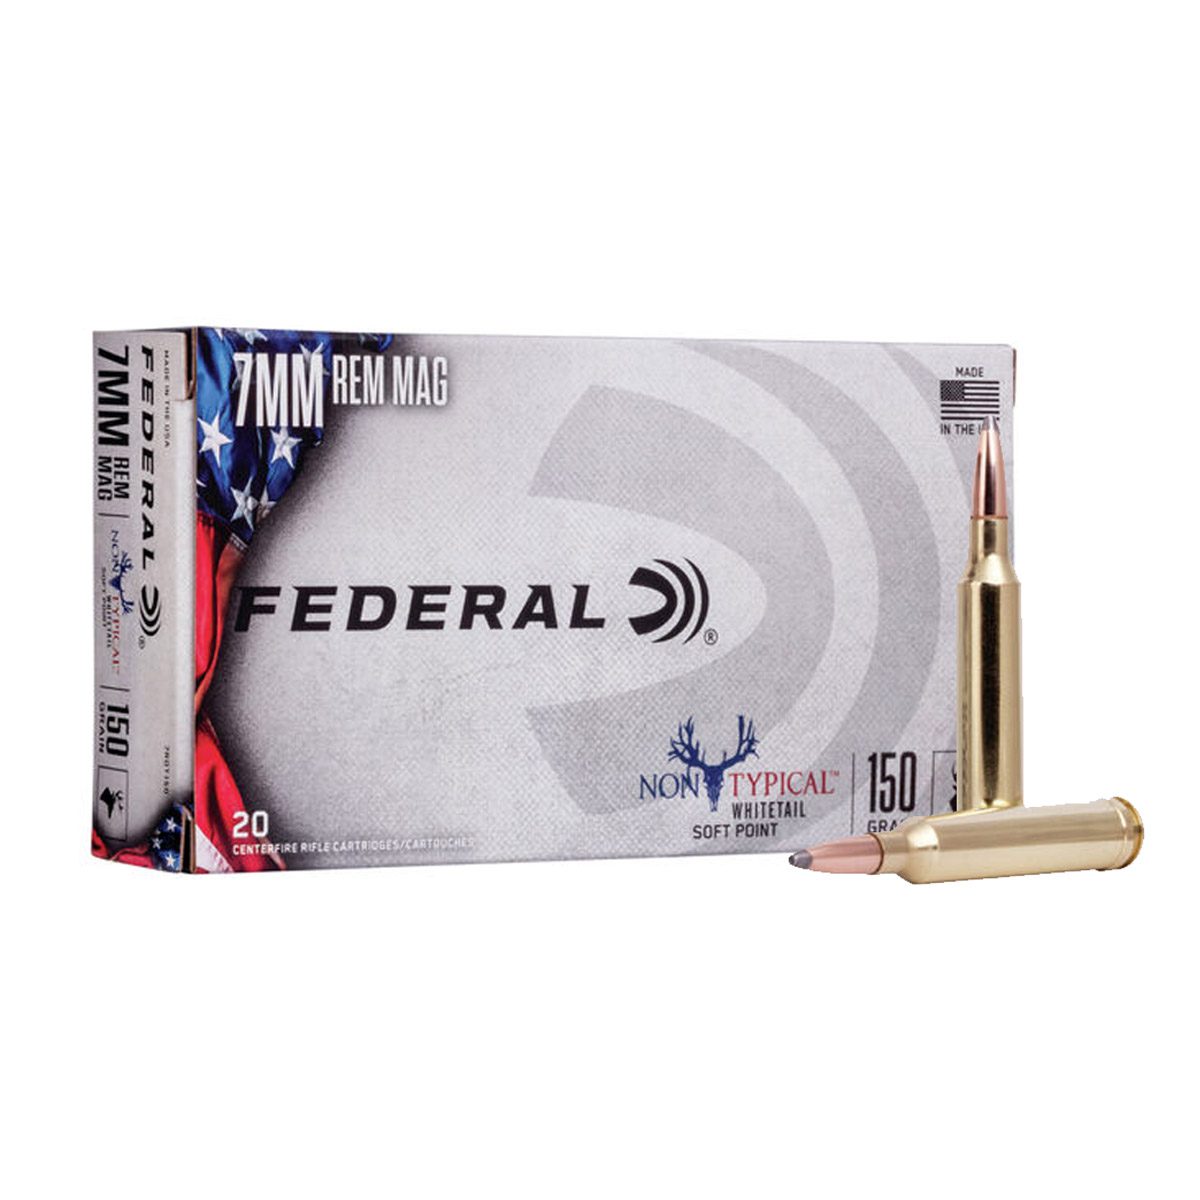 Federal Non-Typical 7mm Rem Mag 150 gr. – 20 Rounds